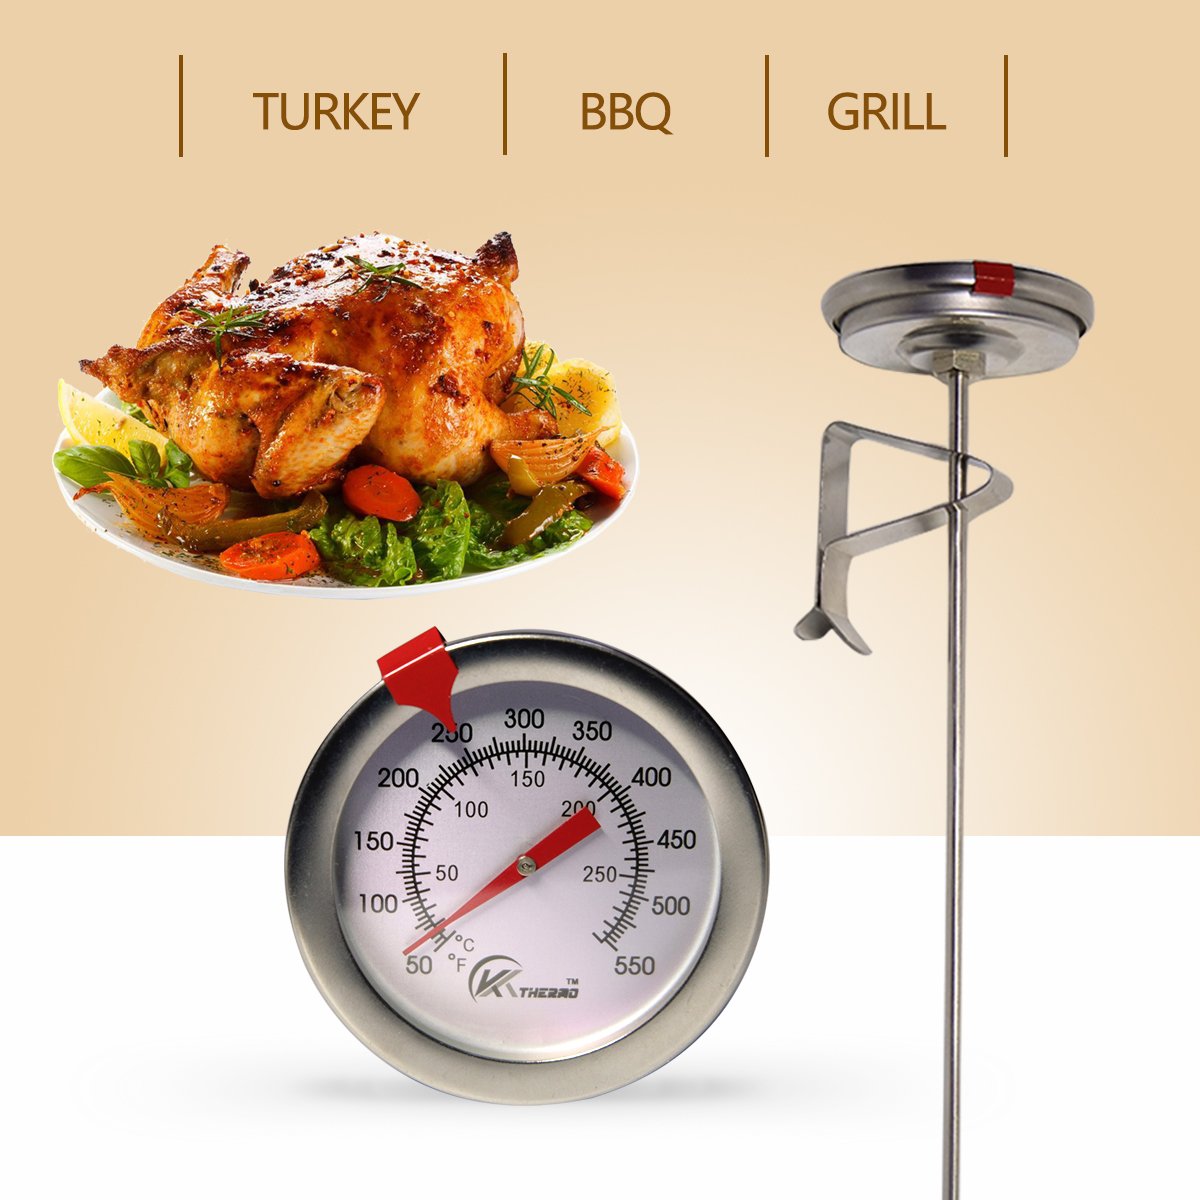 KT THERMO Deep Fry Thermometer With Instant Read,Dial Thermometer,12